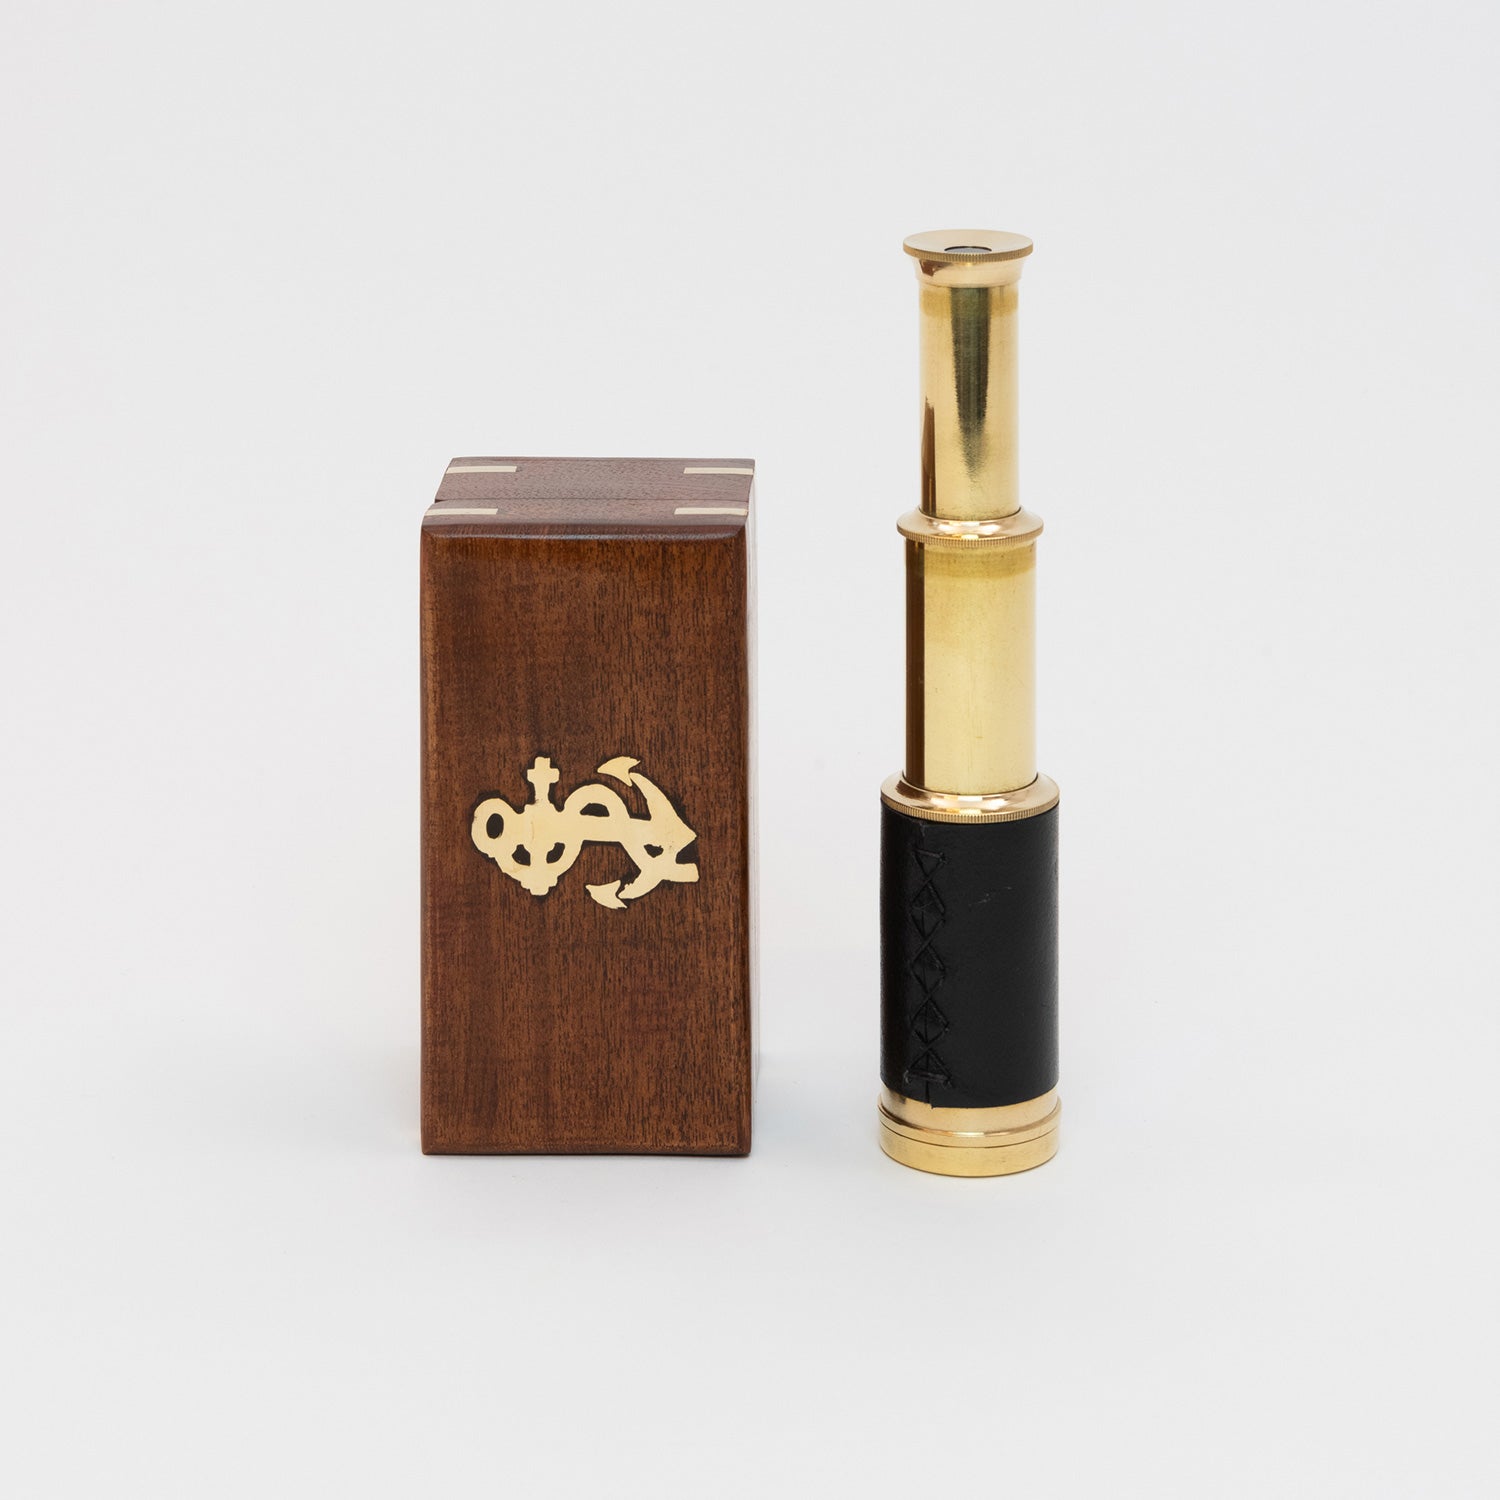 A photo of a brass pocket telescope next to a wooden box. Pictured on a white background.